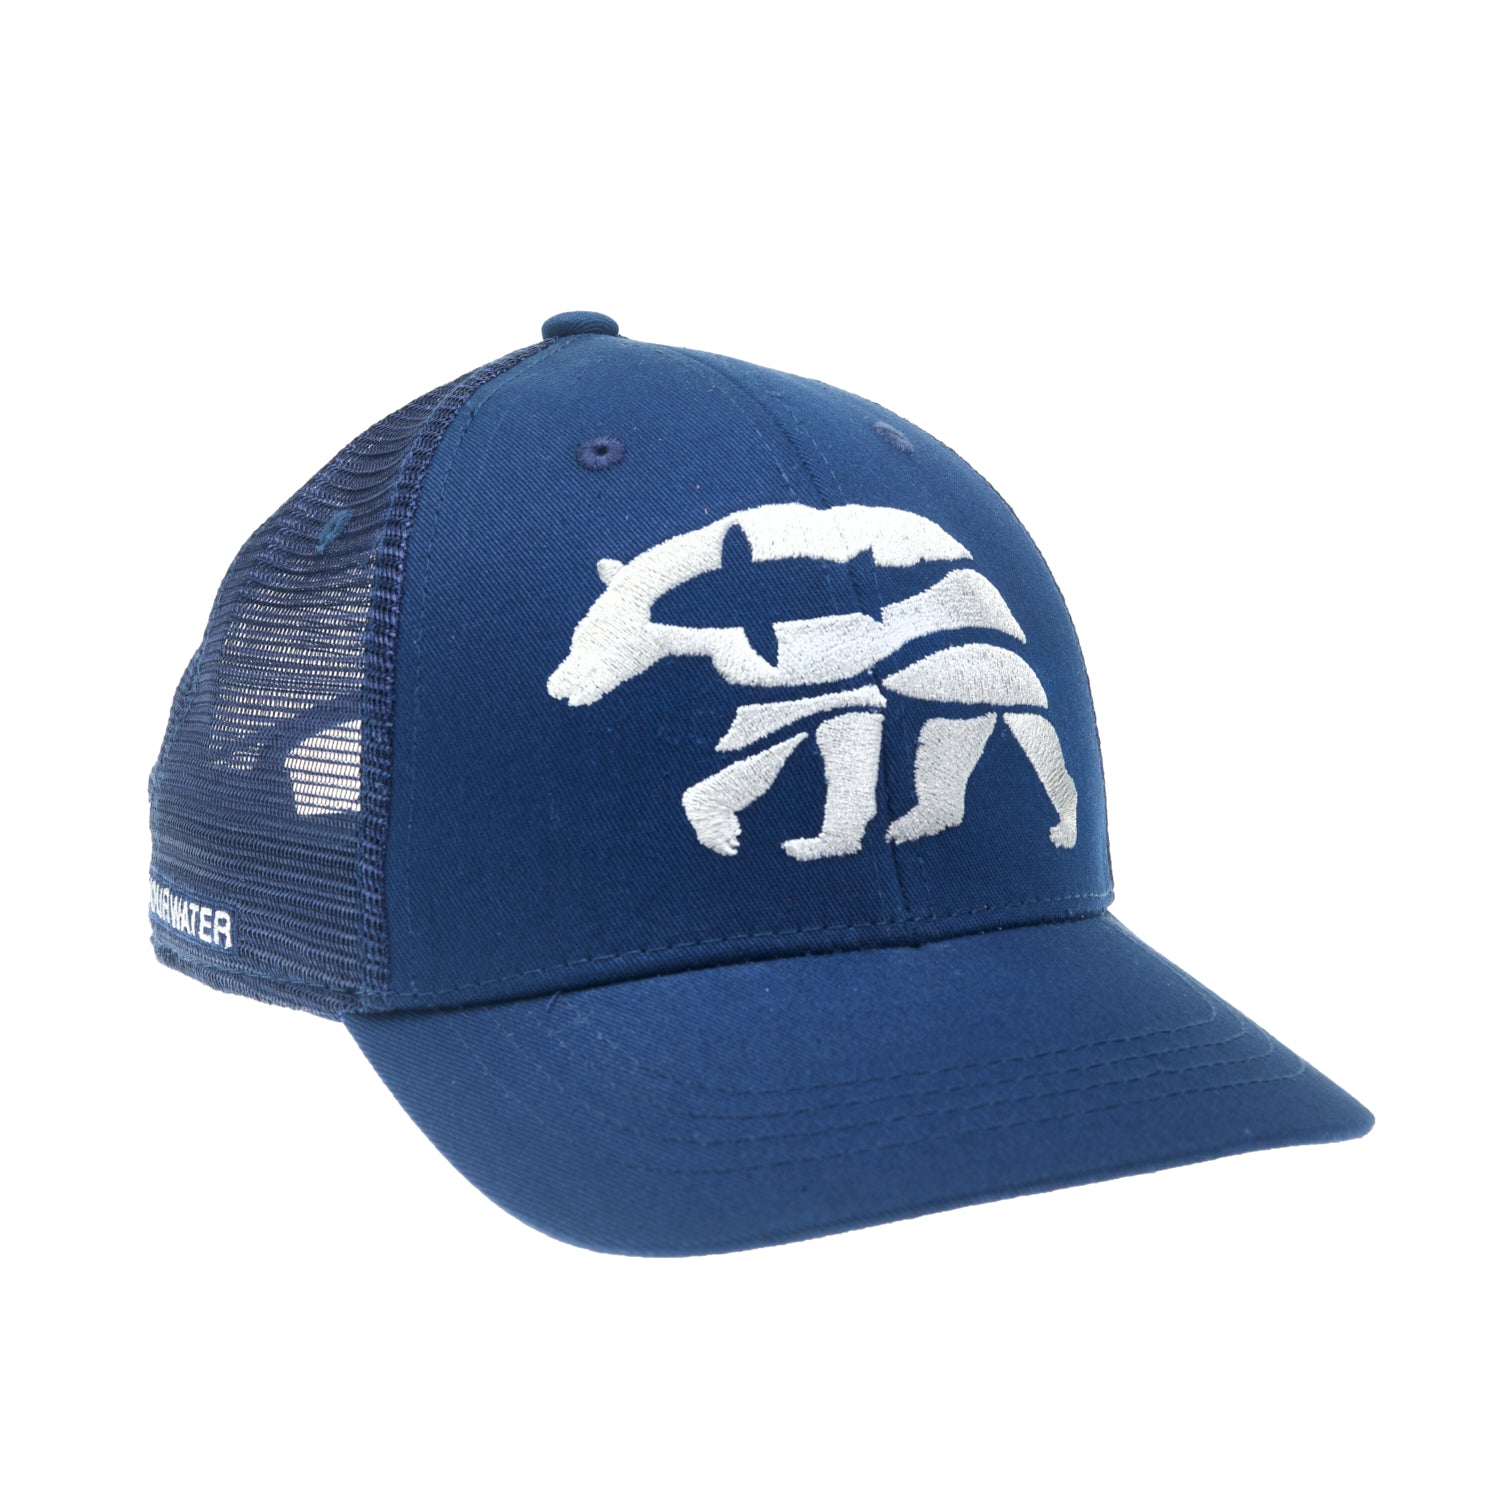 A hat with blue mesh and blue fabric has a design in the shape of a bear with a trout inside of it